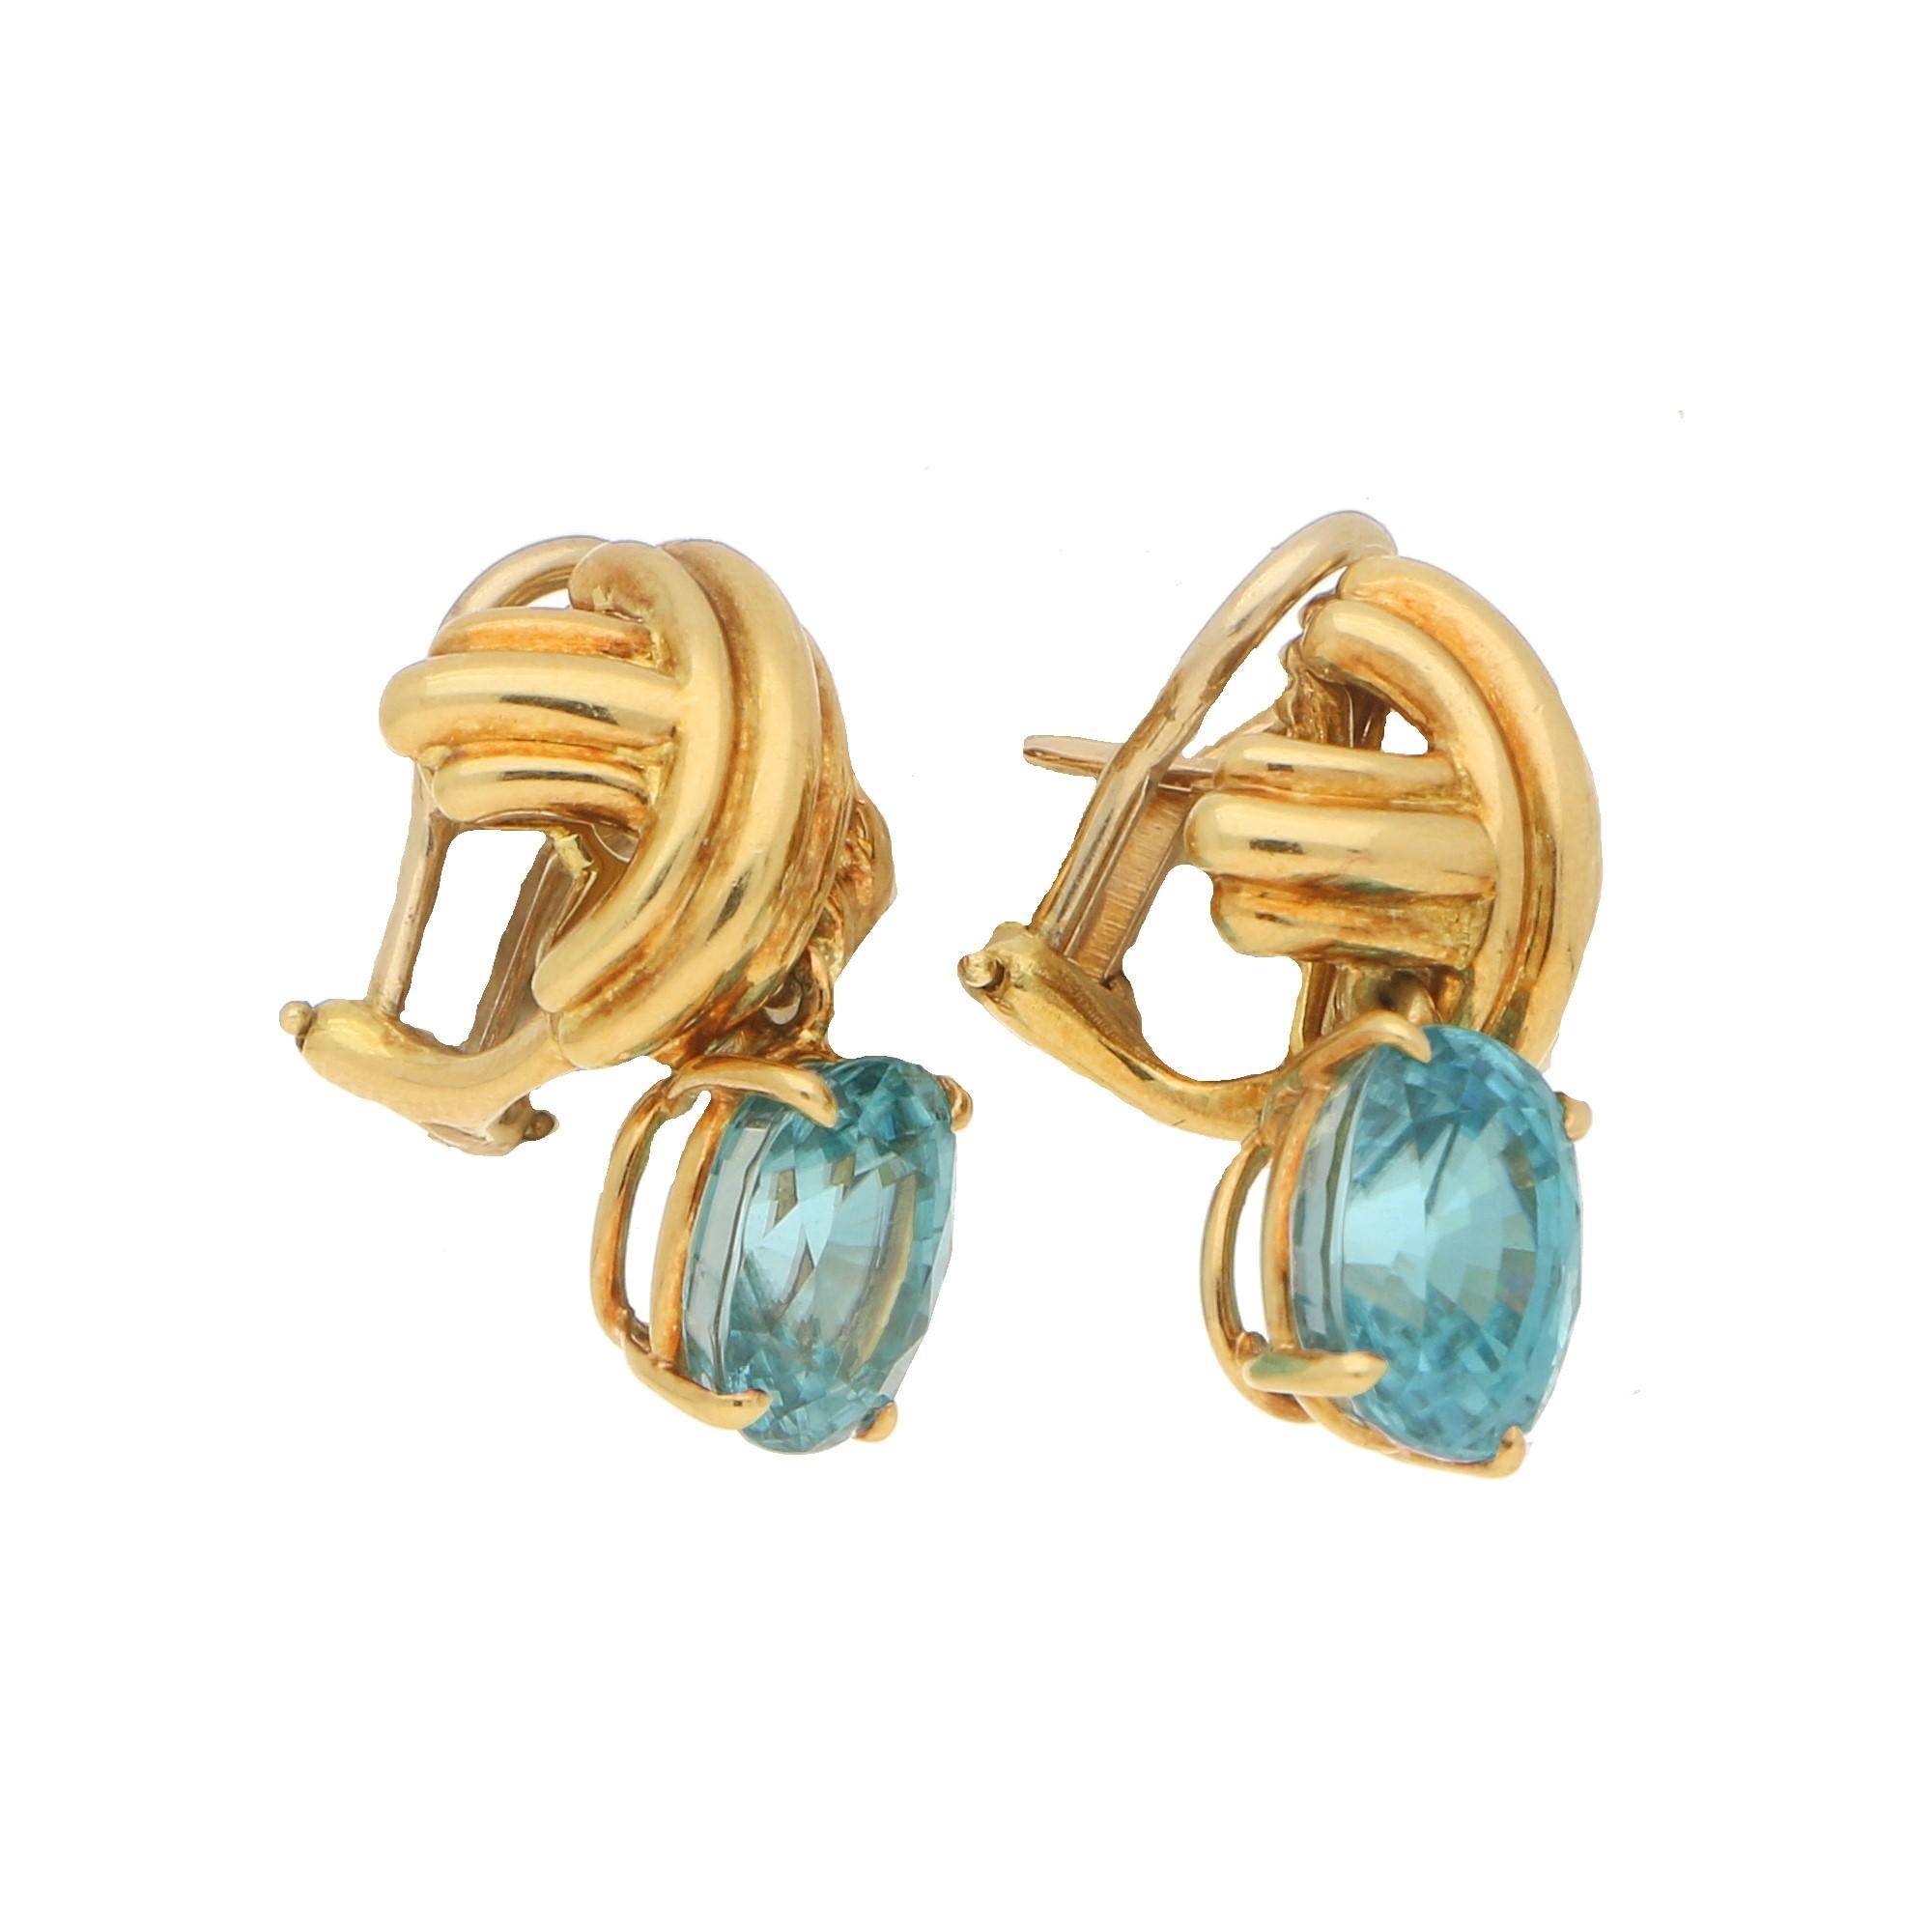 Estimated Zircon weight: 8.00 carats.
An interesting pair of Tiffany & Co. earrings set in 18 carat yellow gold. 
The tops of the earrings feature a cross from which is suspended a strikingly coloured oval cut blue Zircon - a stone popularly used in